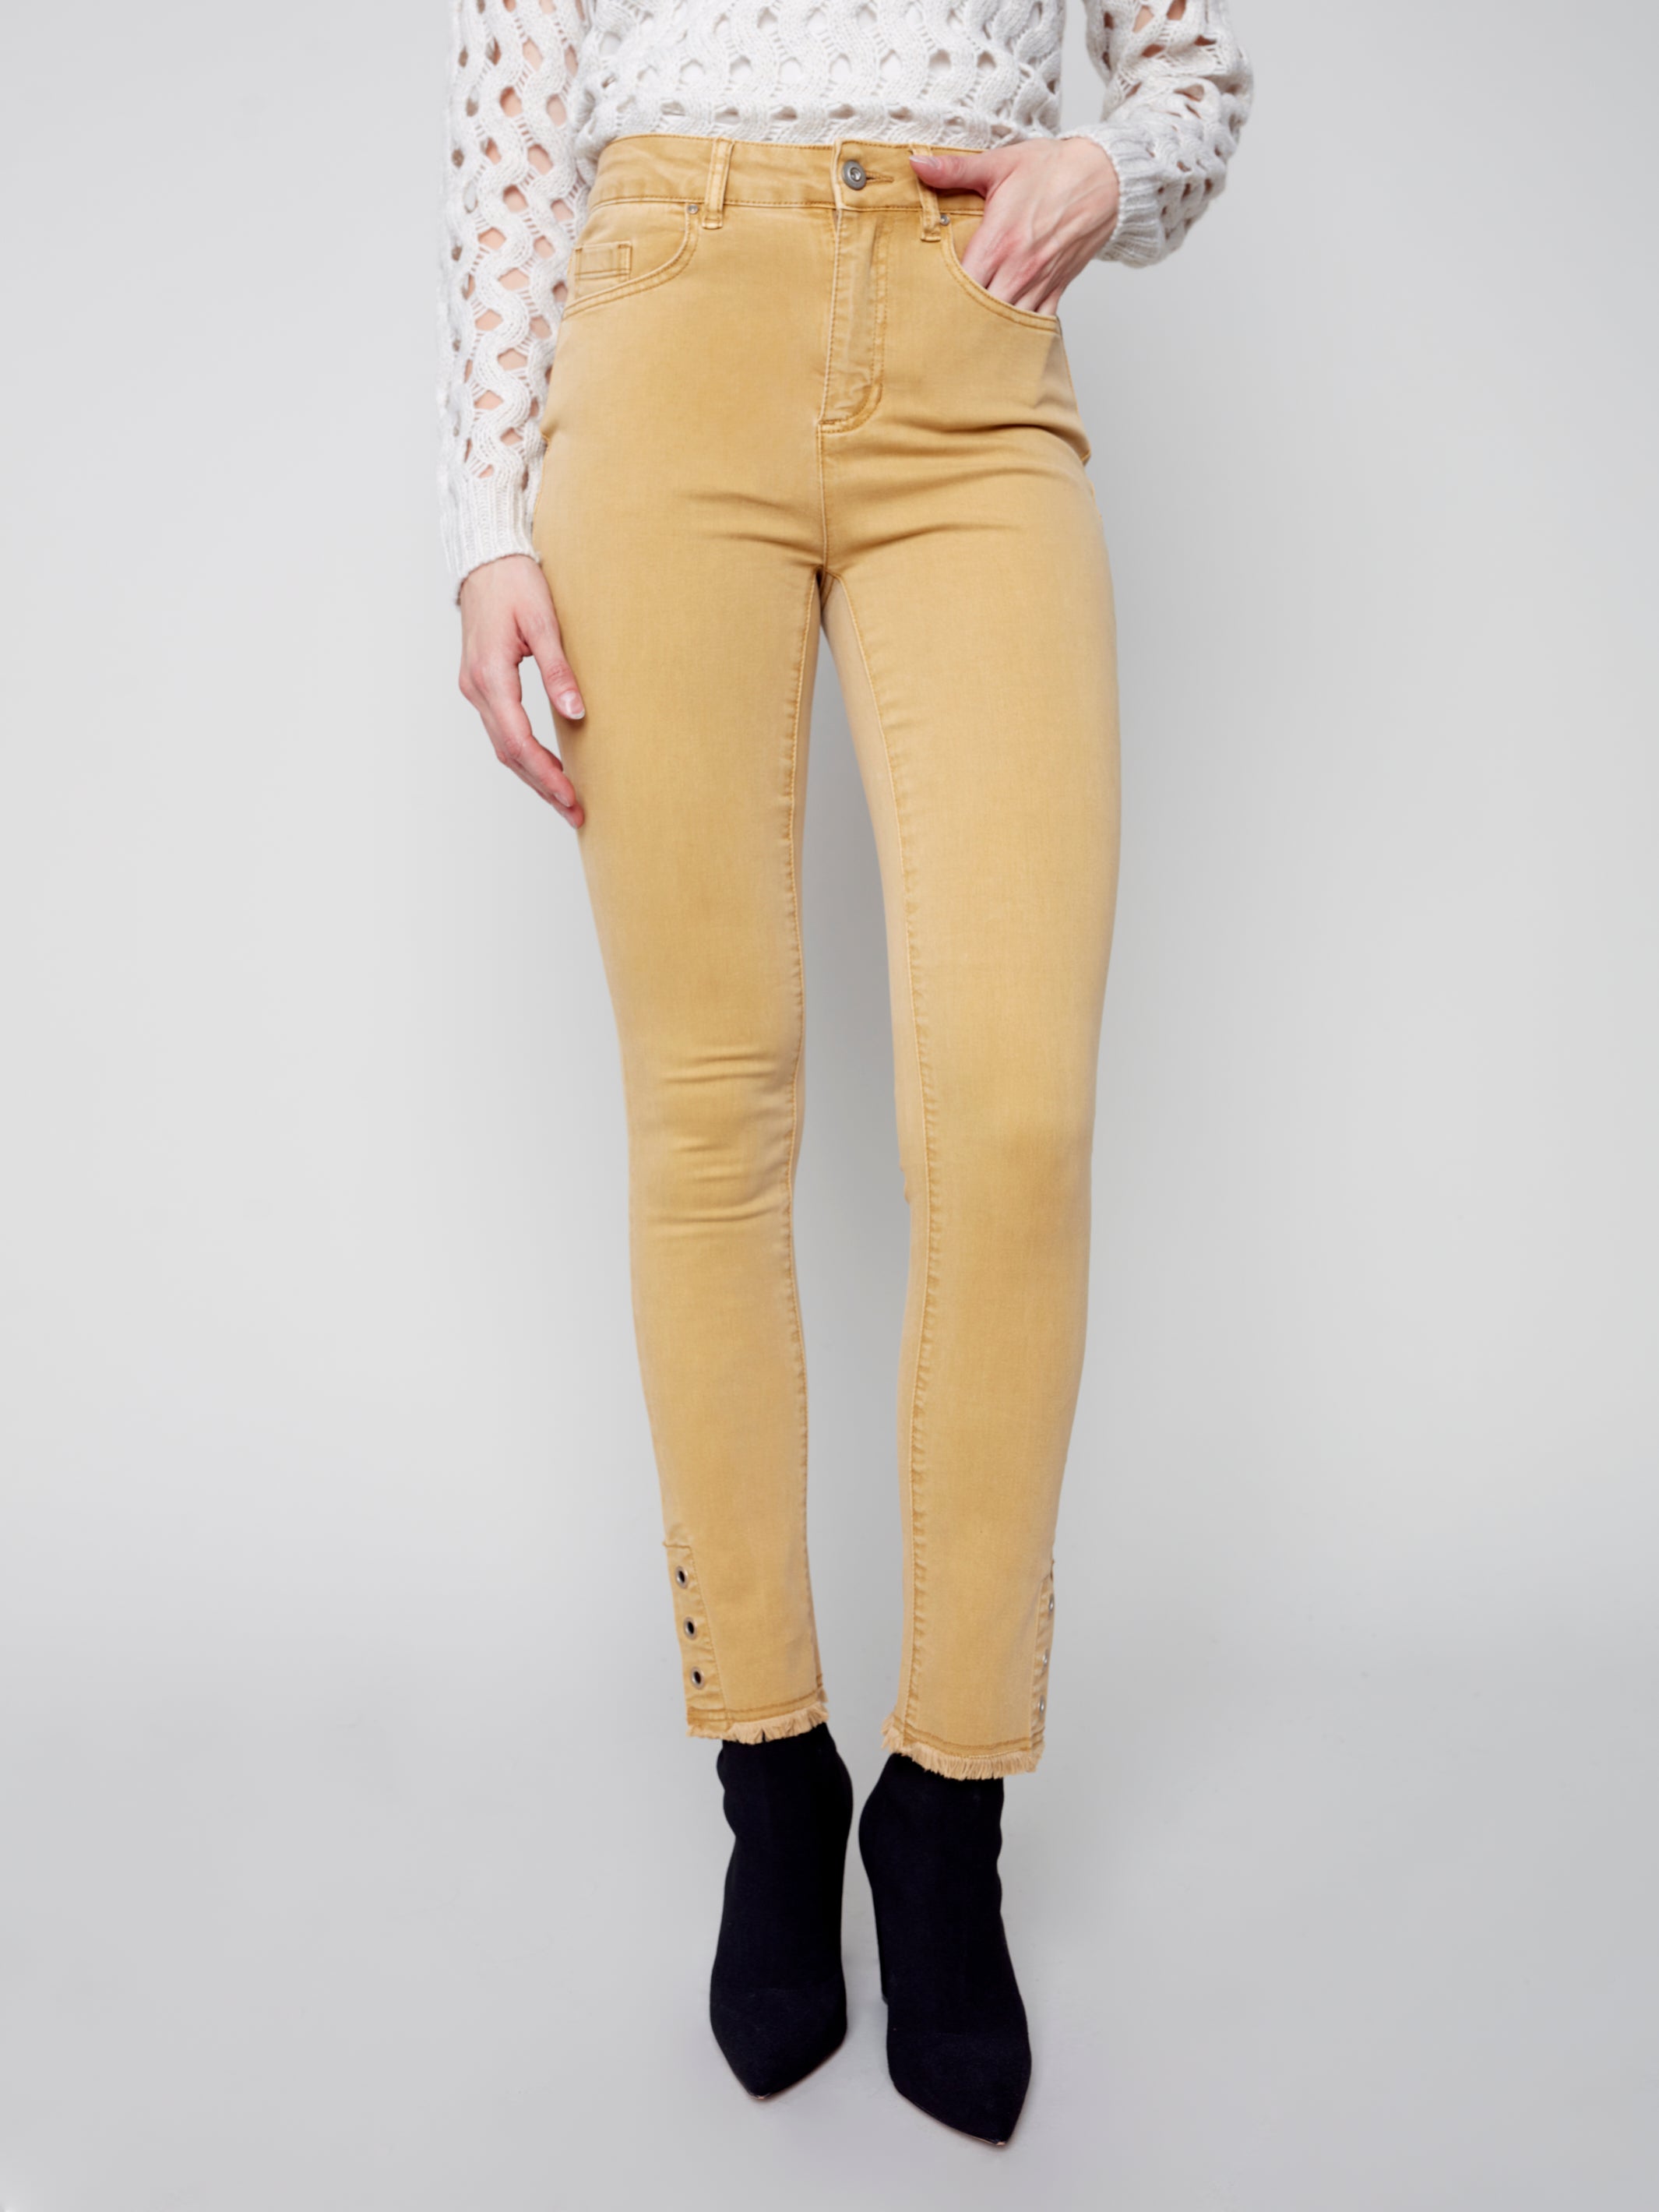 Gold Grommet Ankle Pant by Charlie B